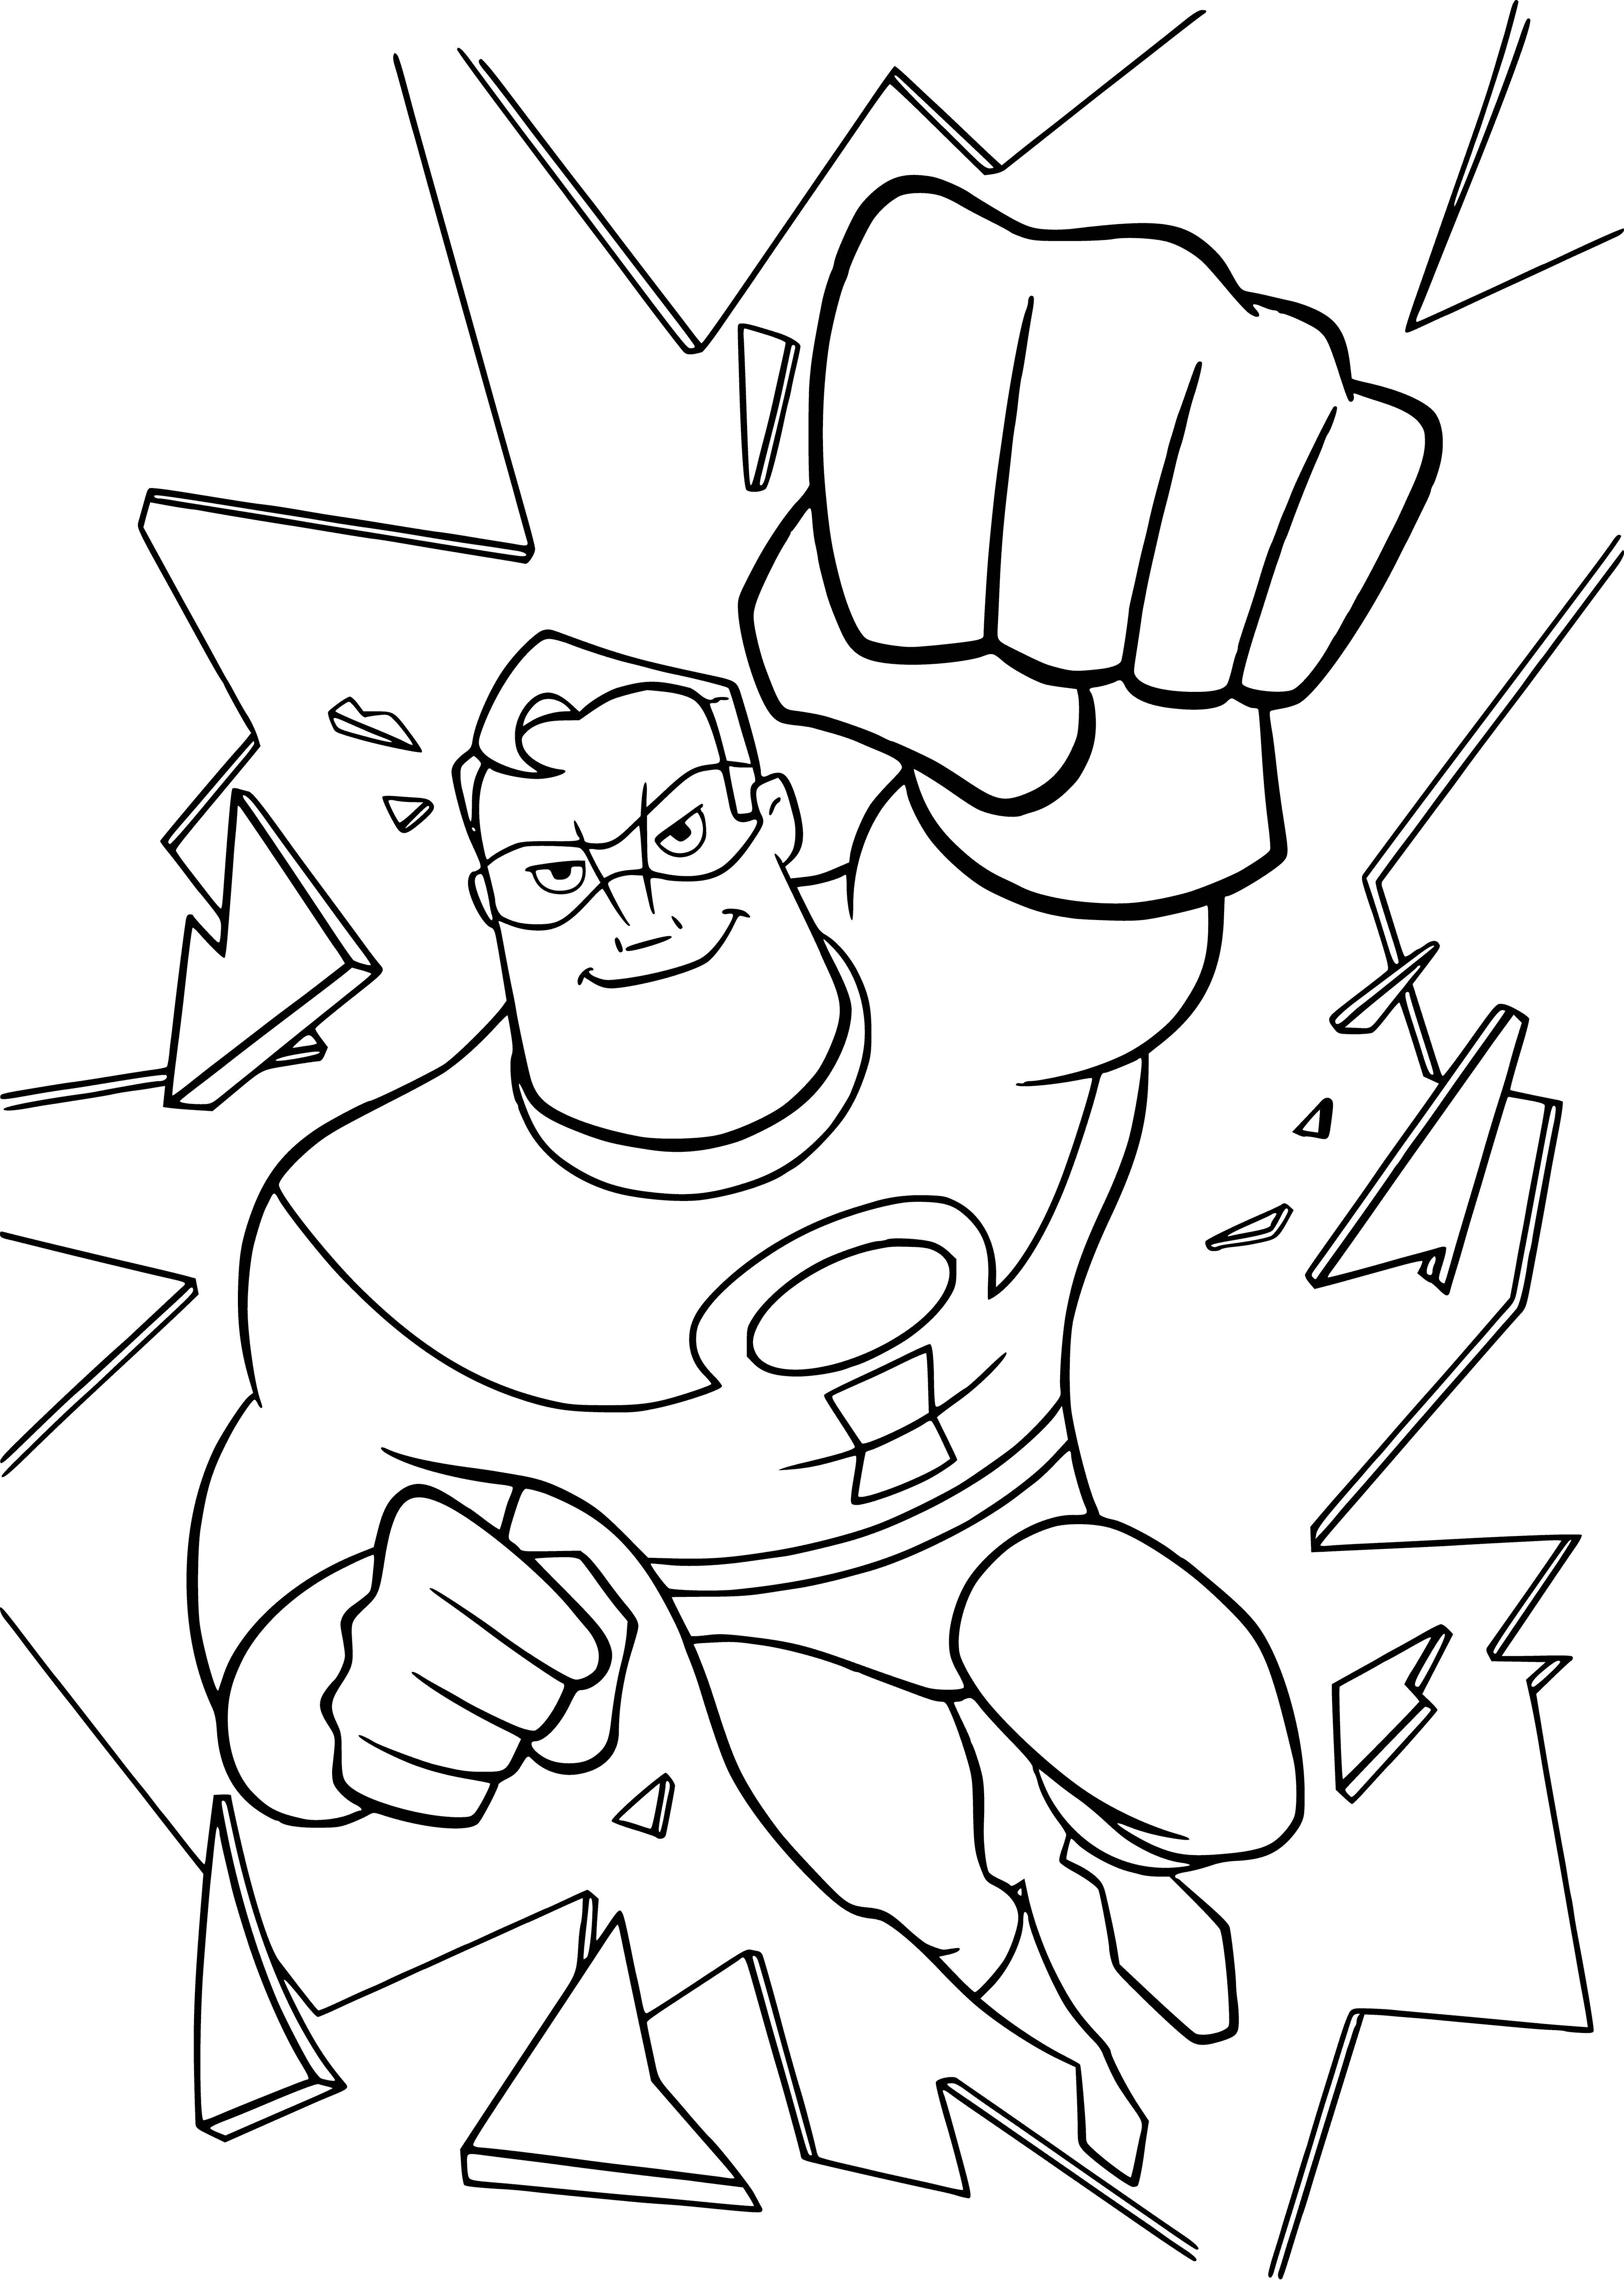 coloring page: Man in superhero suit ready to take on anything. Eyes covered, red "I" on chest & powerful stance.